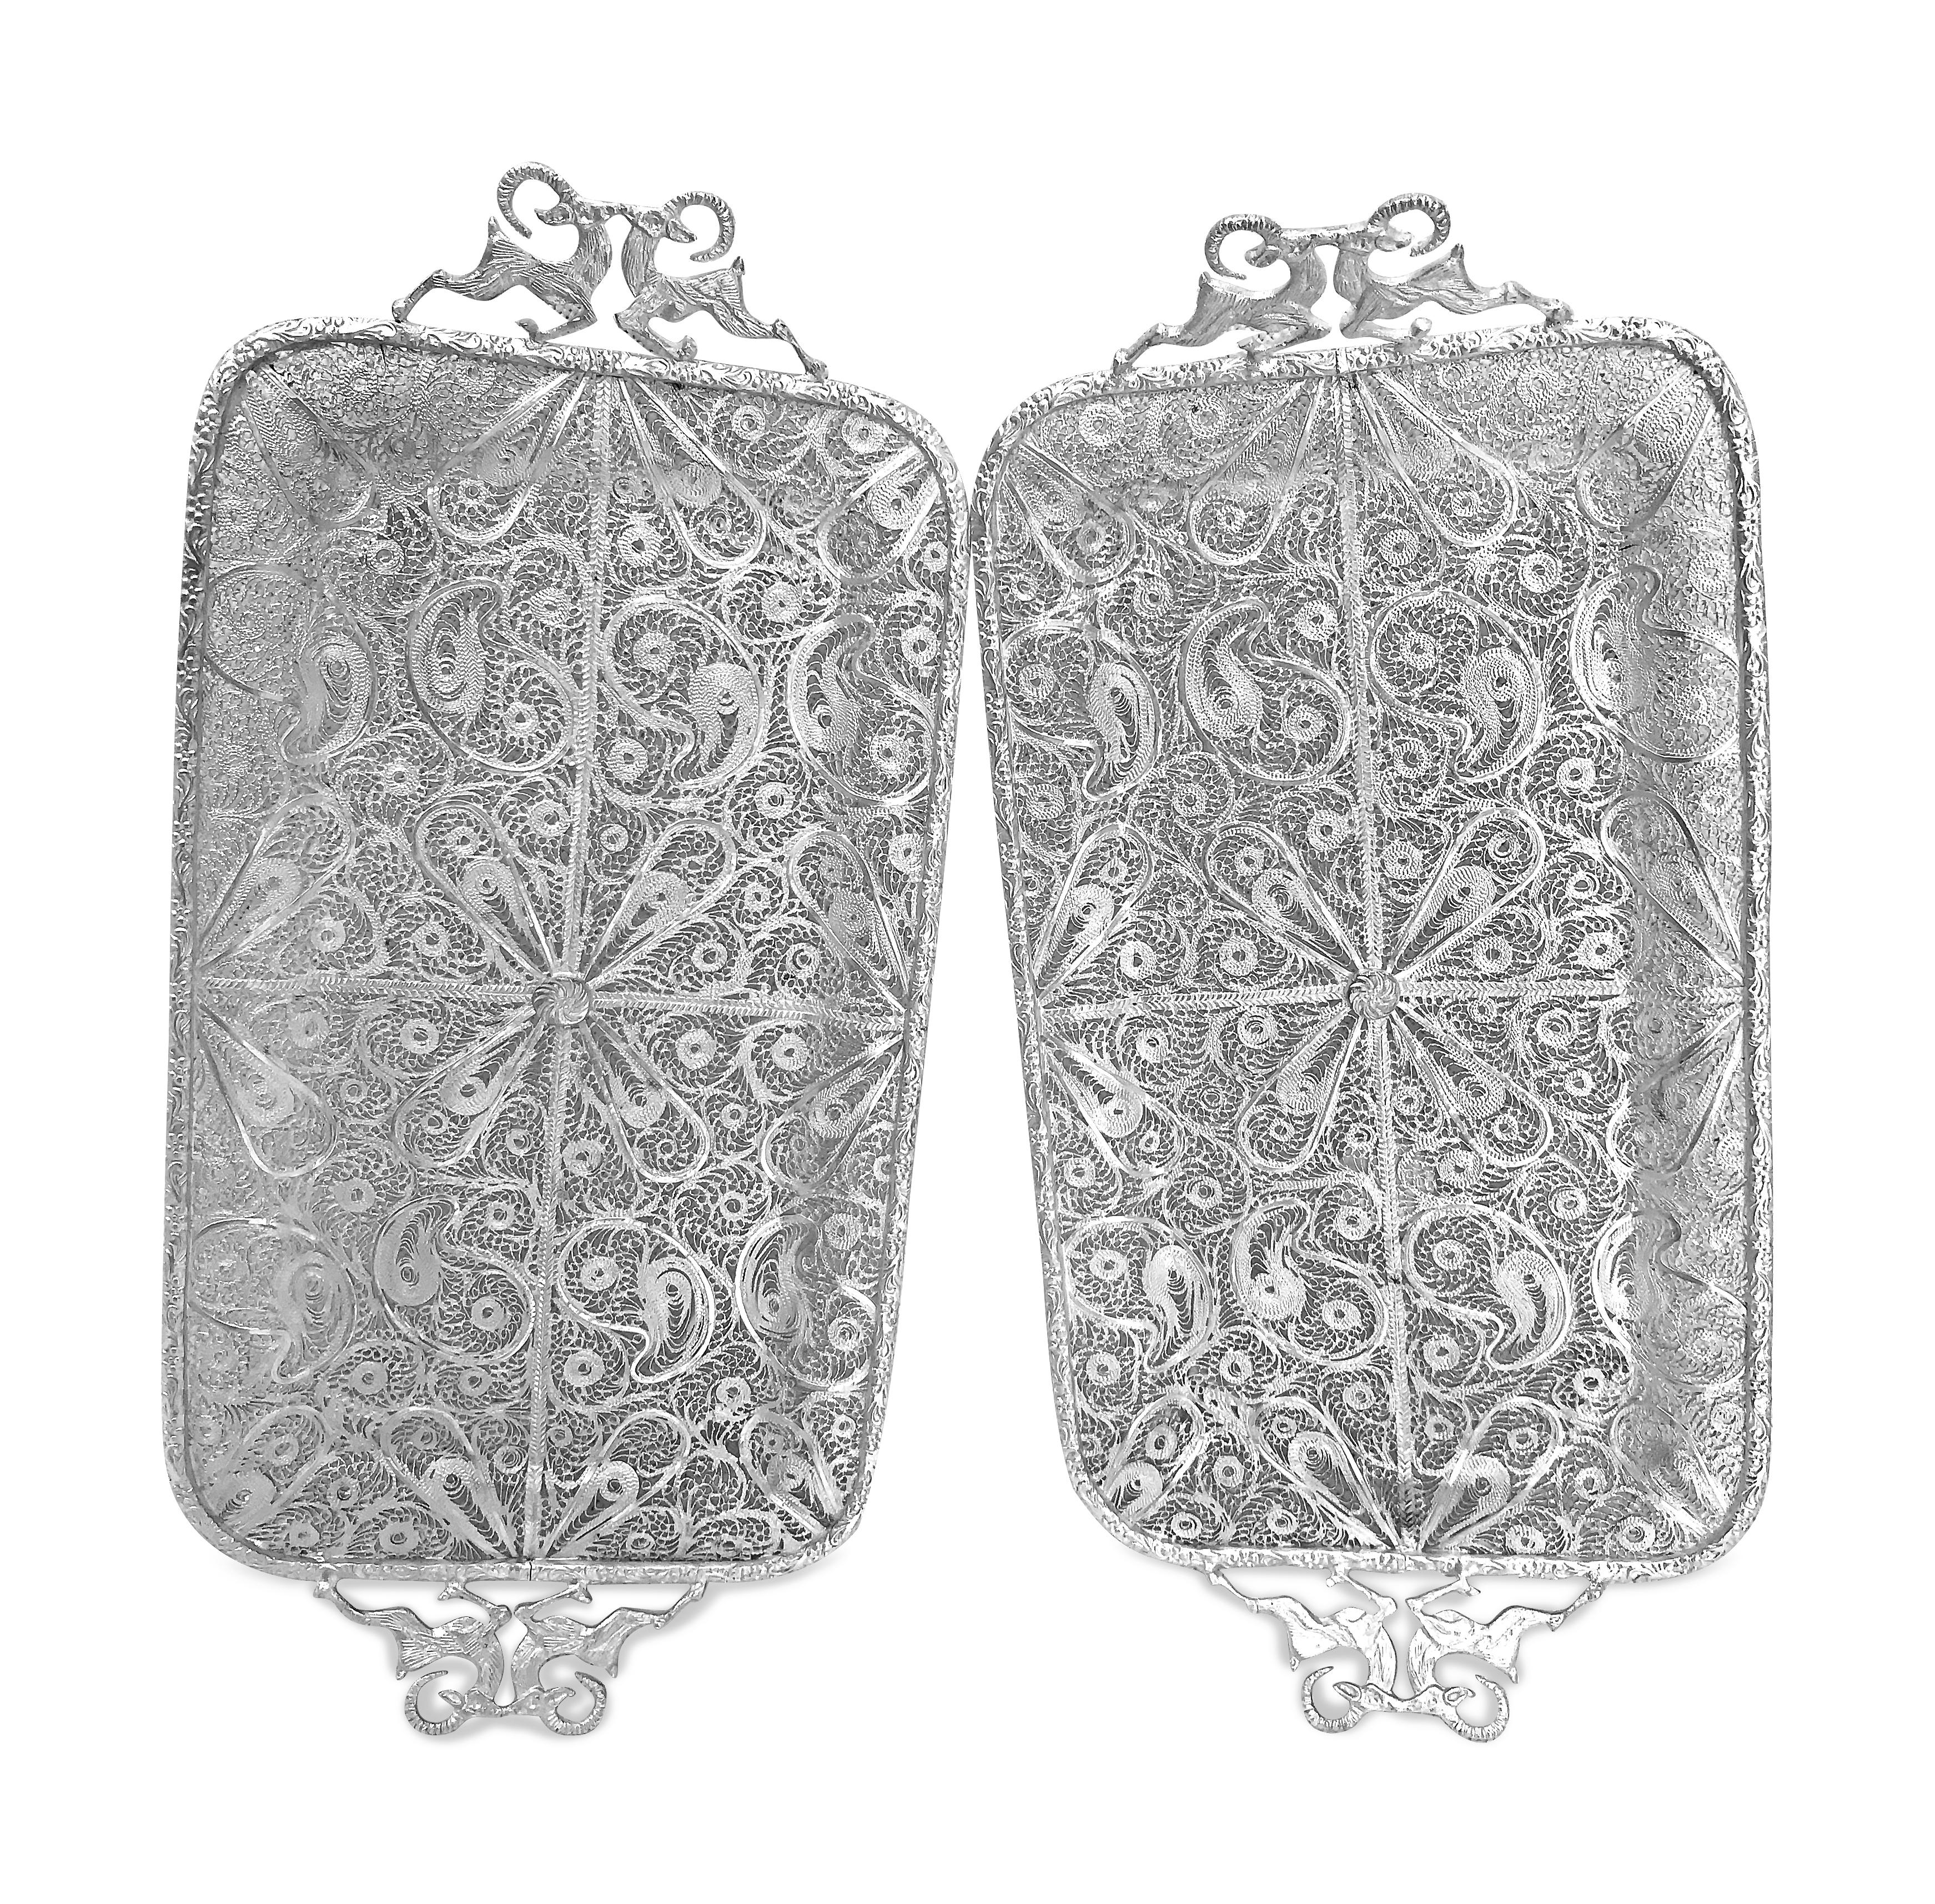 This beautiful pair has been made by hand and it is absolutely nice and pretty. The trays are persian silver filigree 0.99 karat which is almost pure silver . The handles are well designed with two goats on each side . The trays has four stands